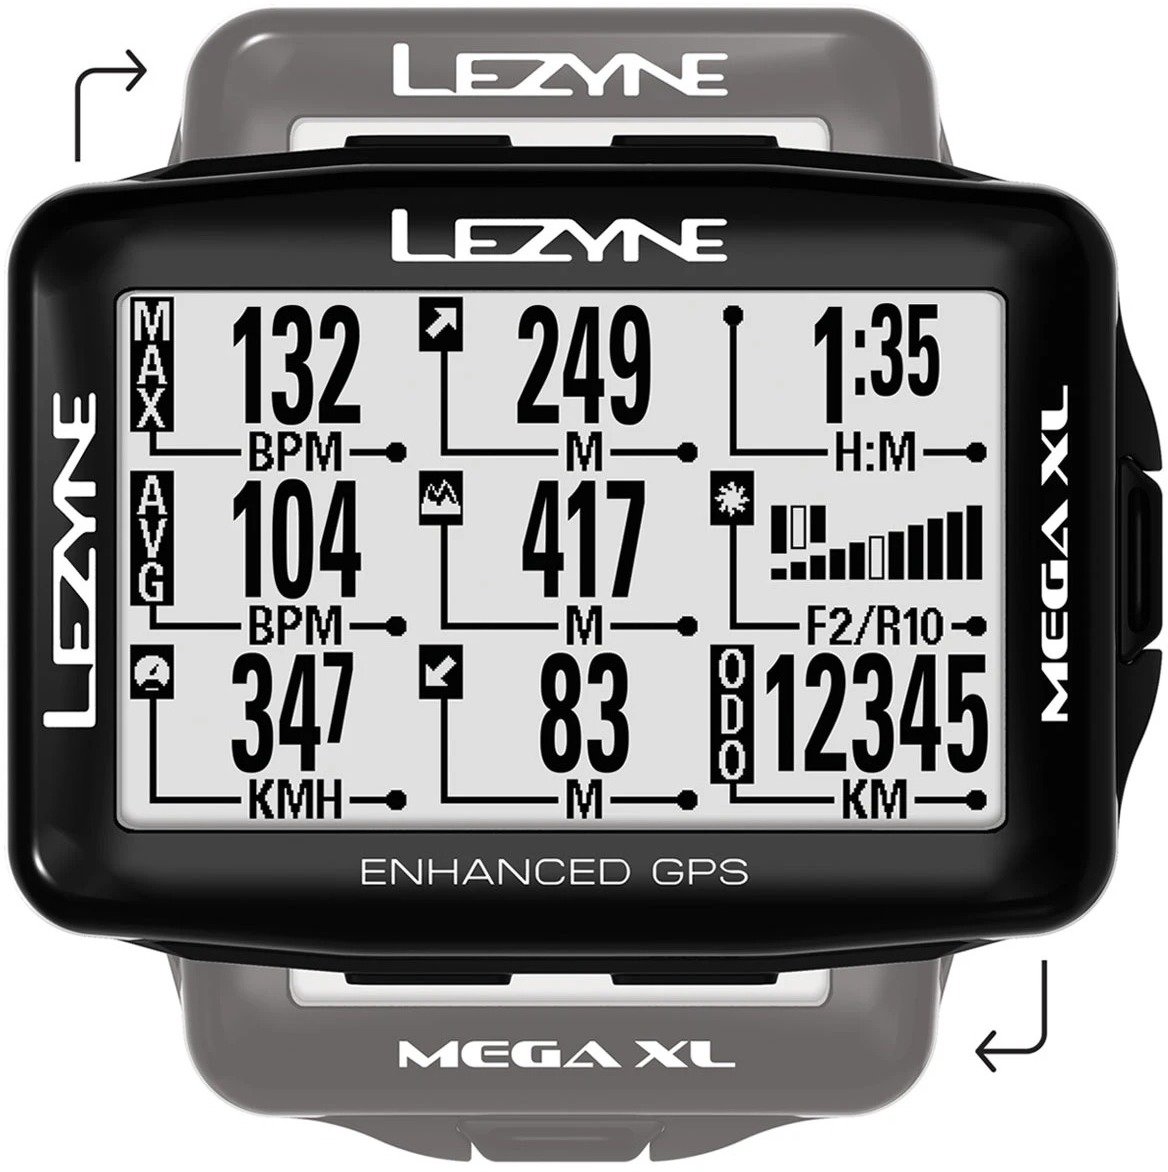 Lezyne Mega XL GPS Smart Loaded - Western Cycle Source for Sports